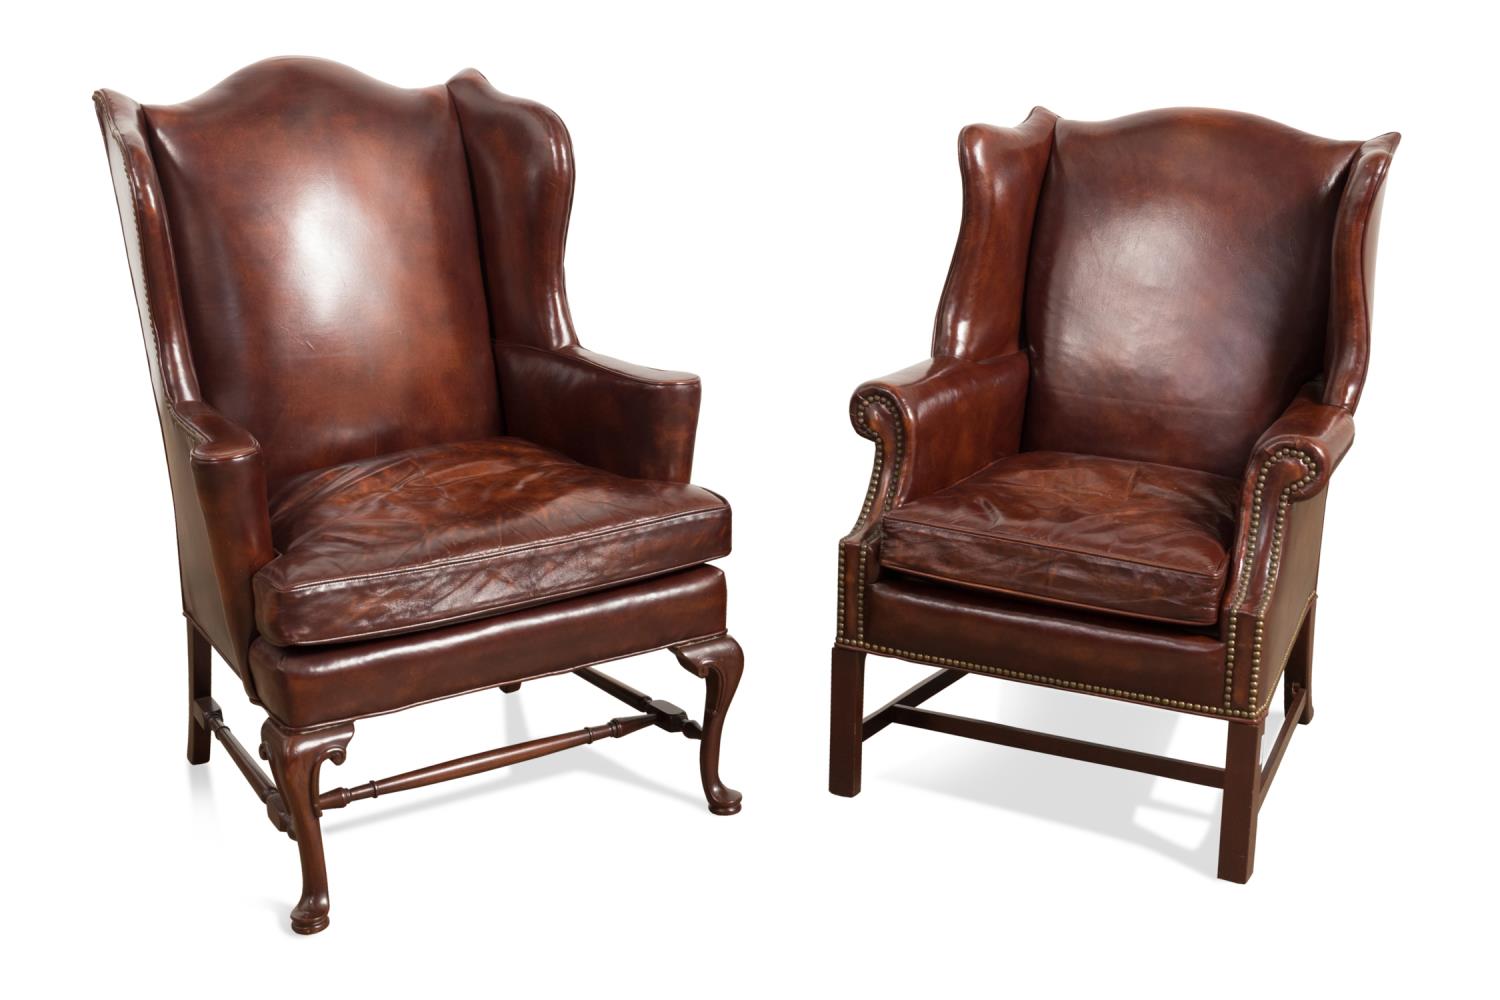 TWO HICKORY CHAIR LEATHER WINGBACK 2bfea3